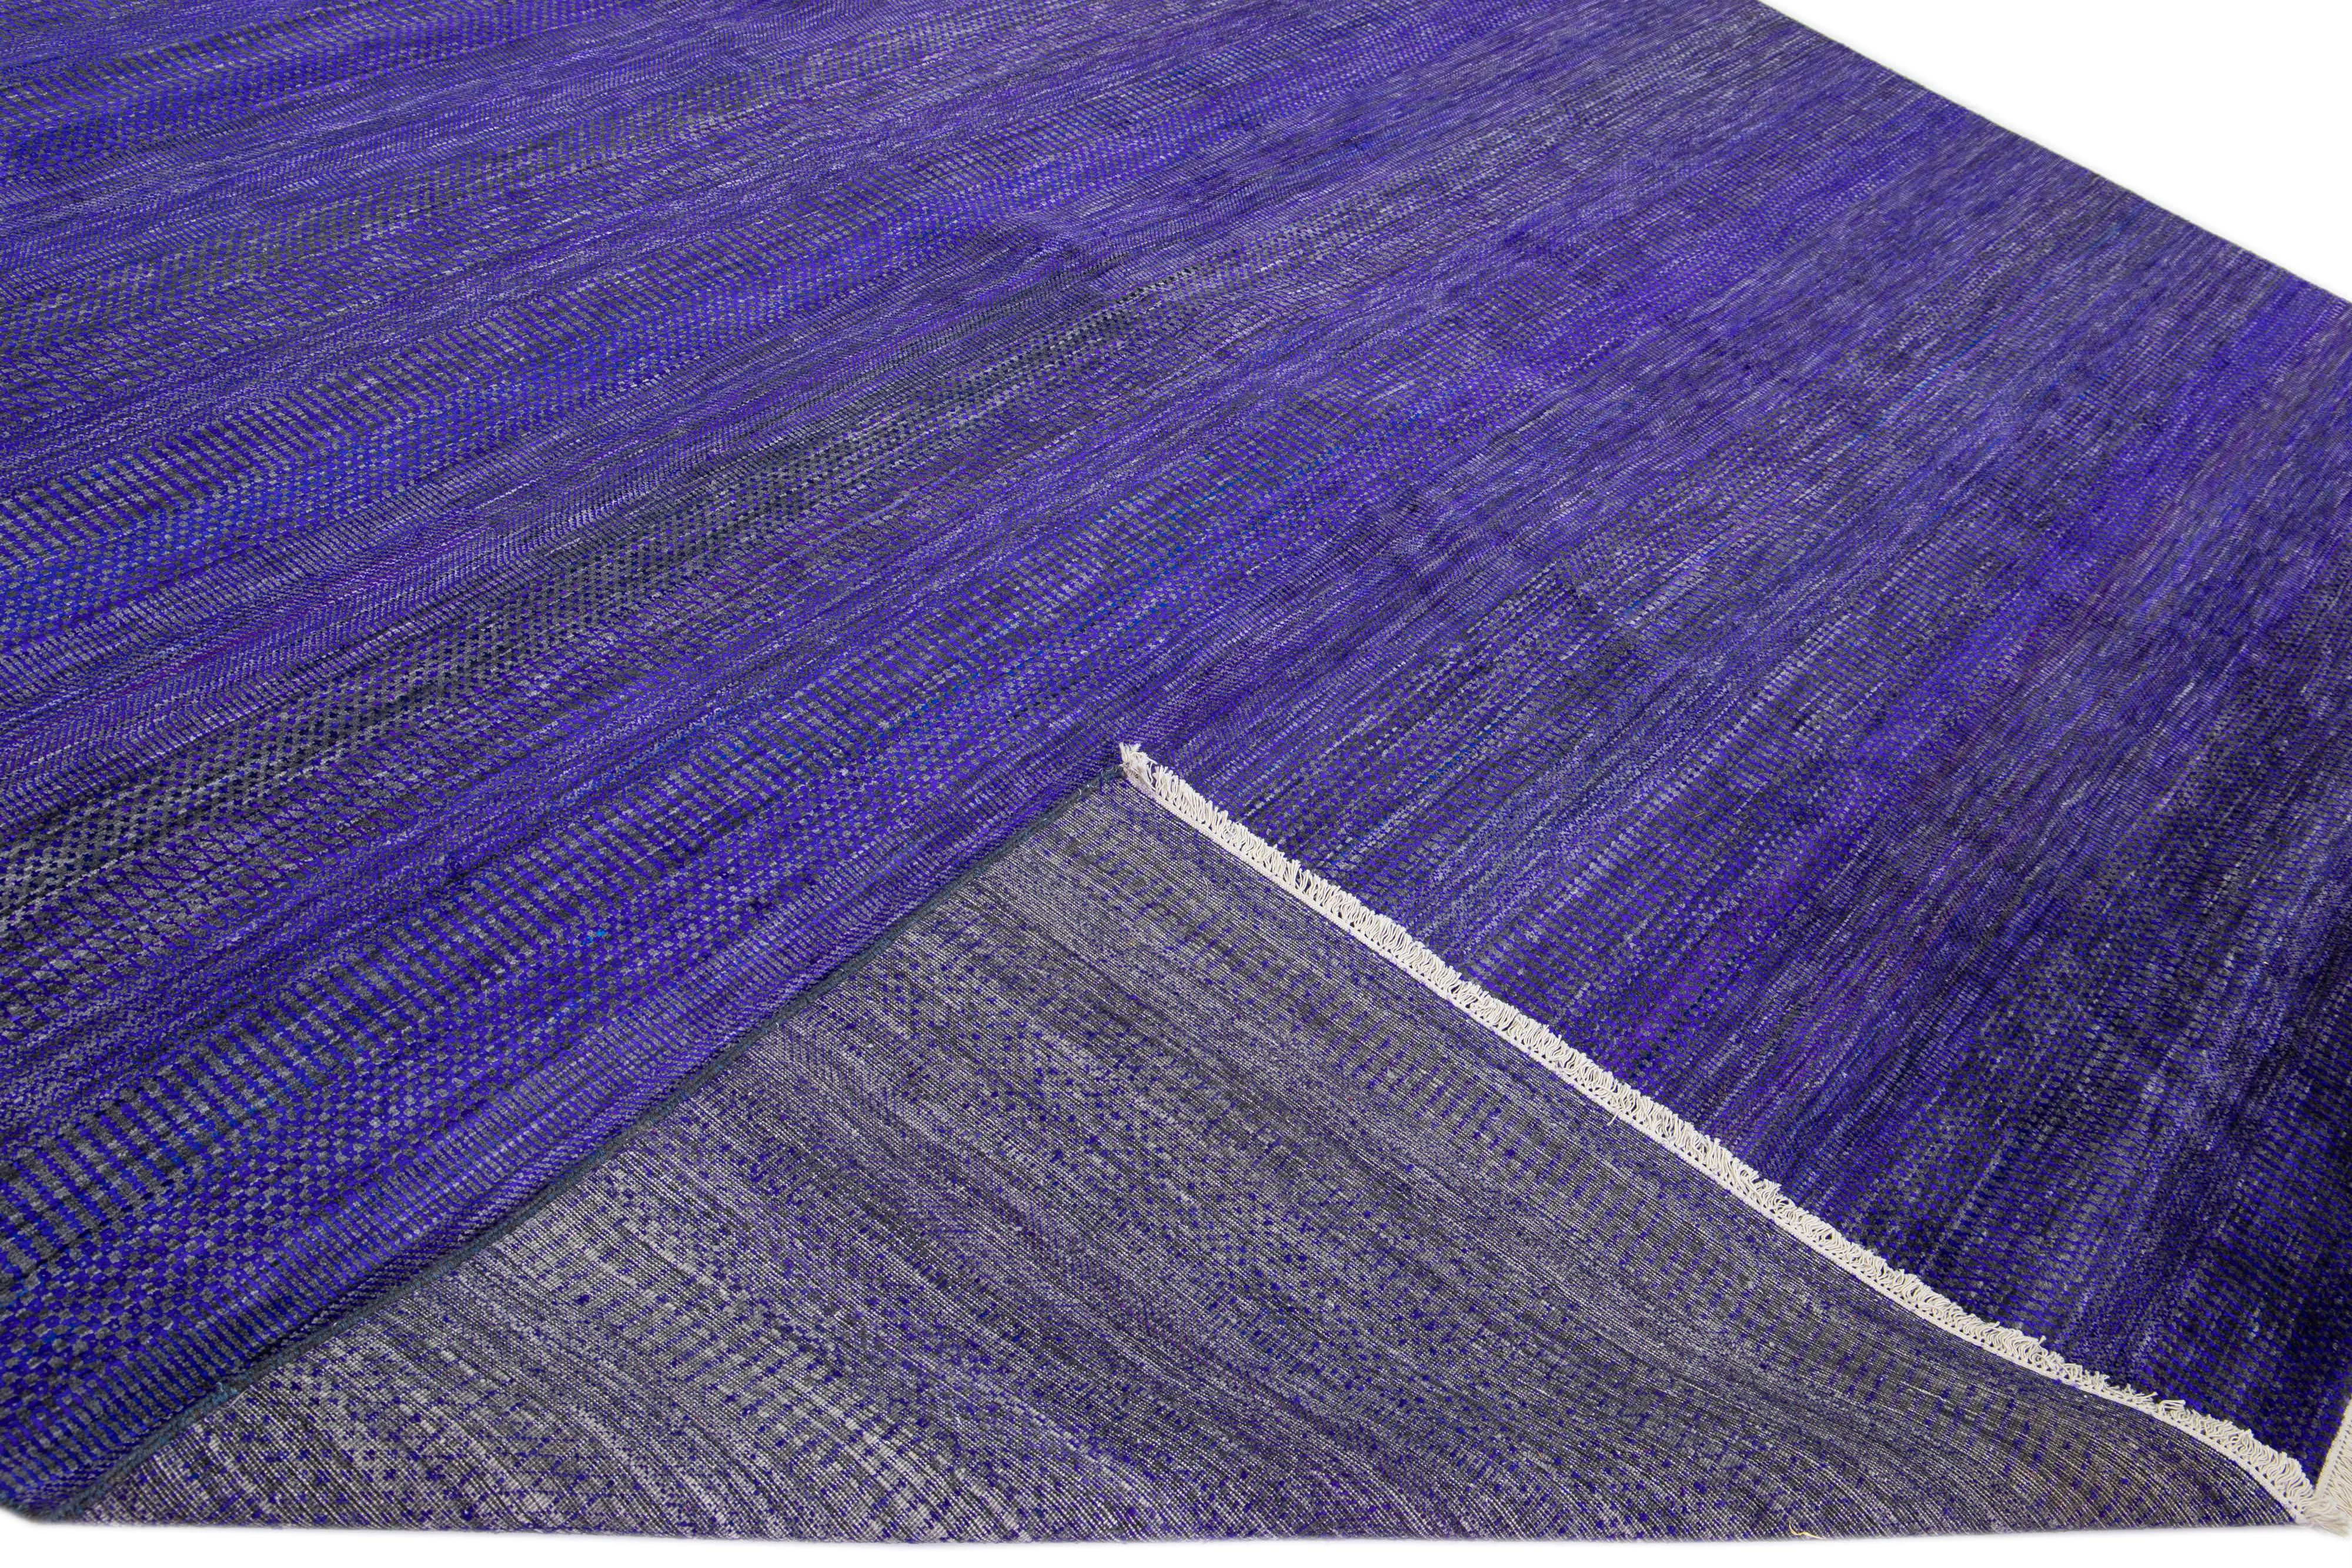 Beautiful Contemporary Savannah hand-knotted wool rug with a purple and gray field. This piece has an all-over geometric pattern design.

This rug measures: 12' x 17'10